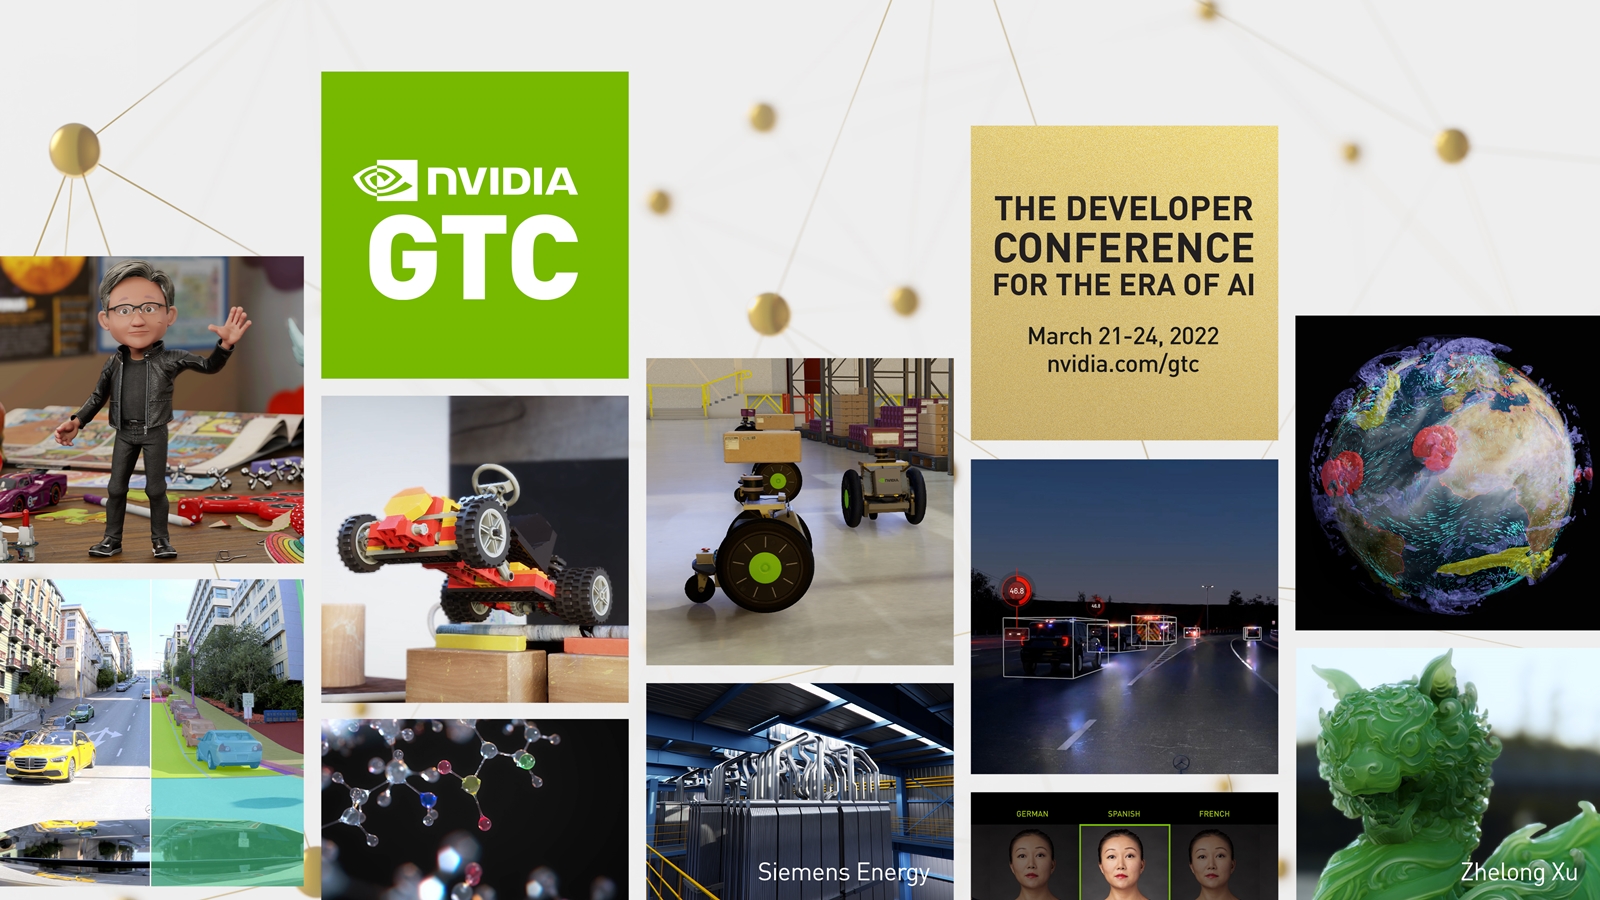 NVIDIA-GTC-March-2022_press-release_collage.jpg